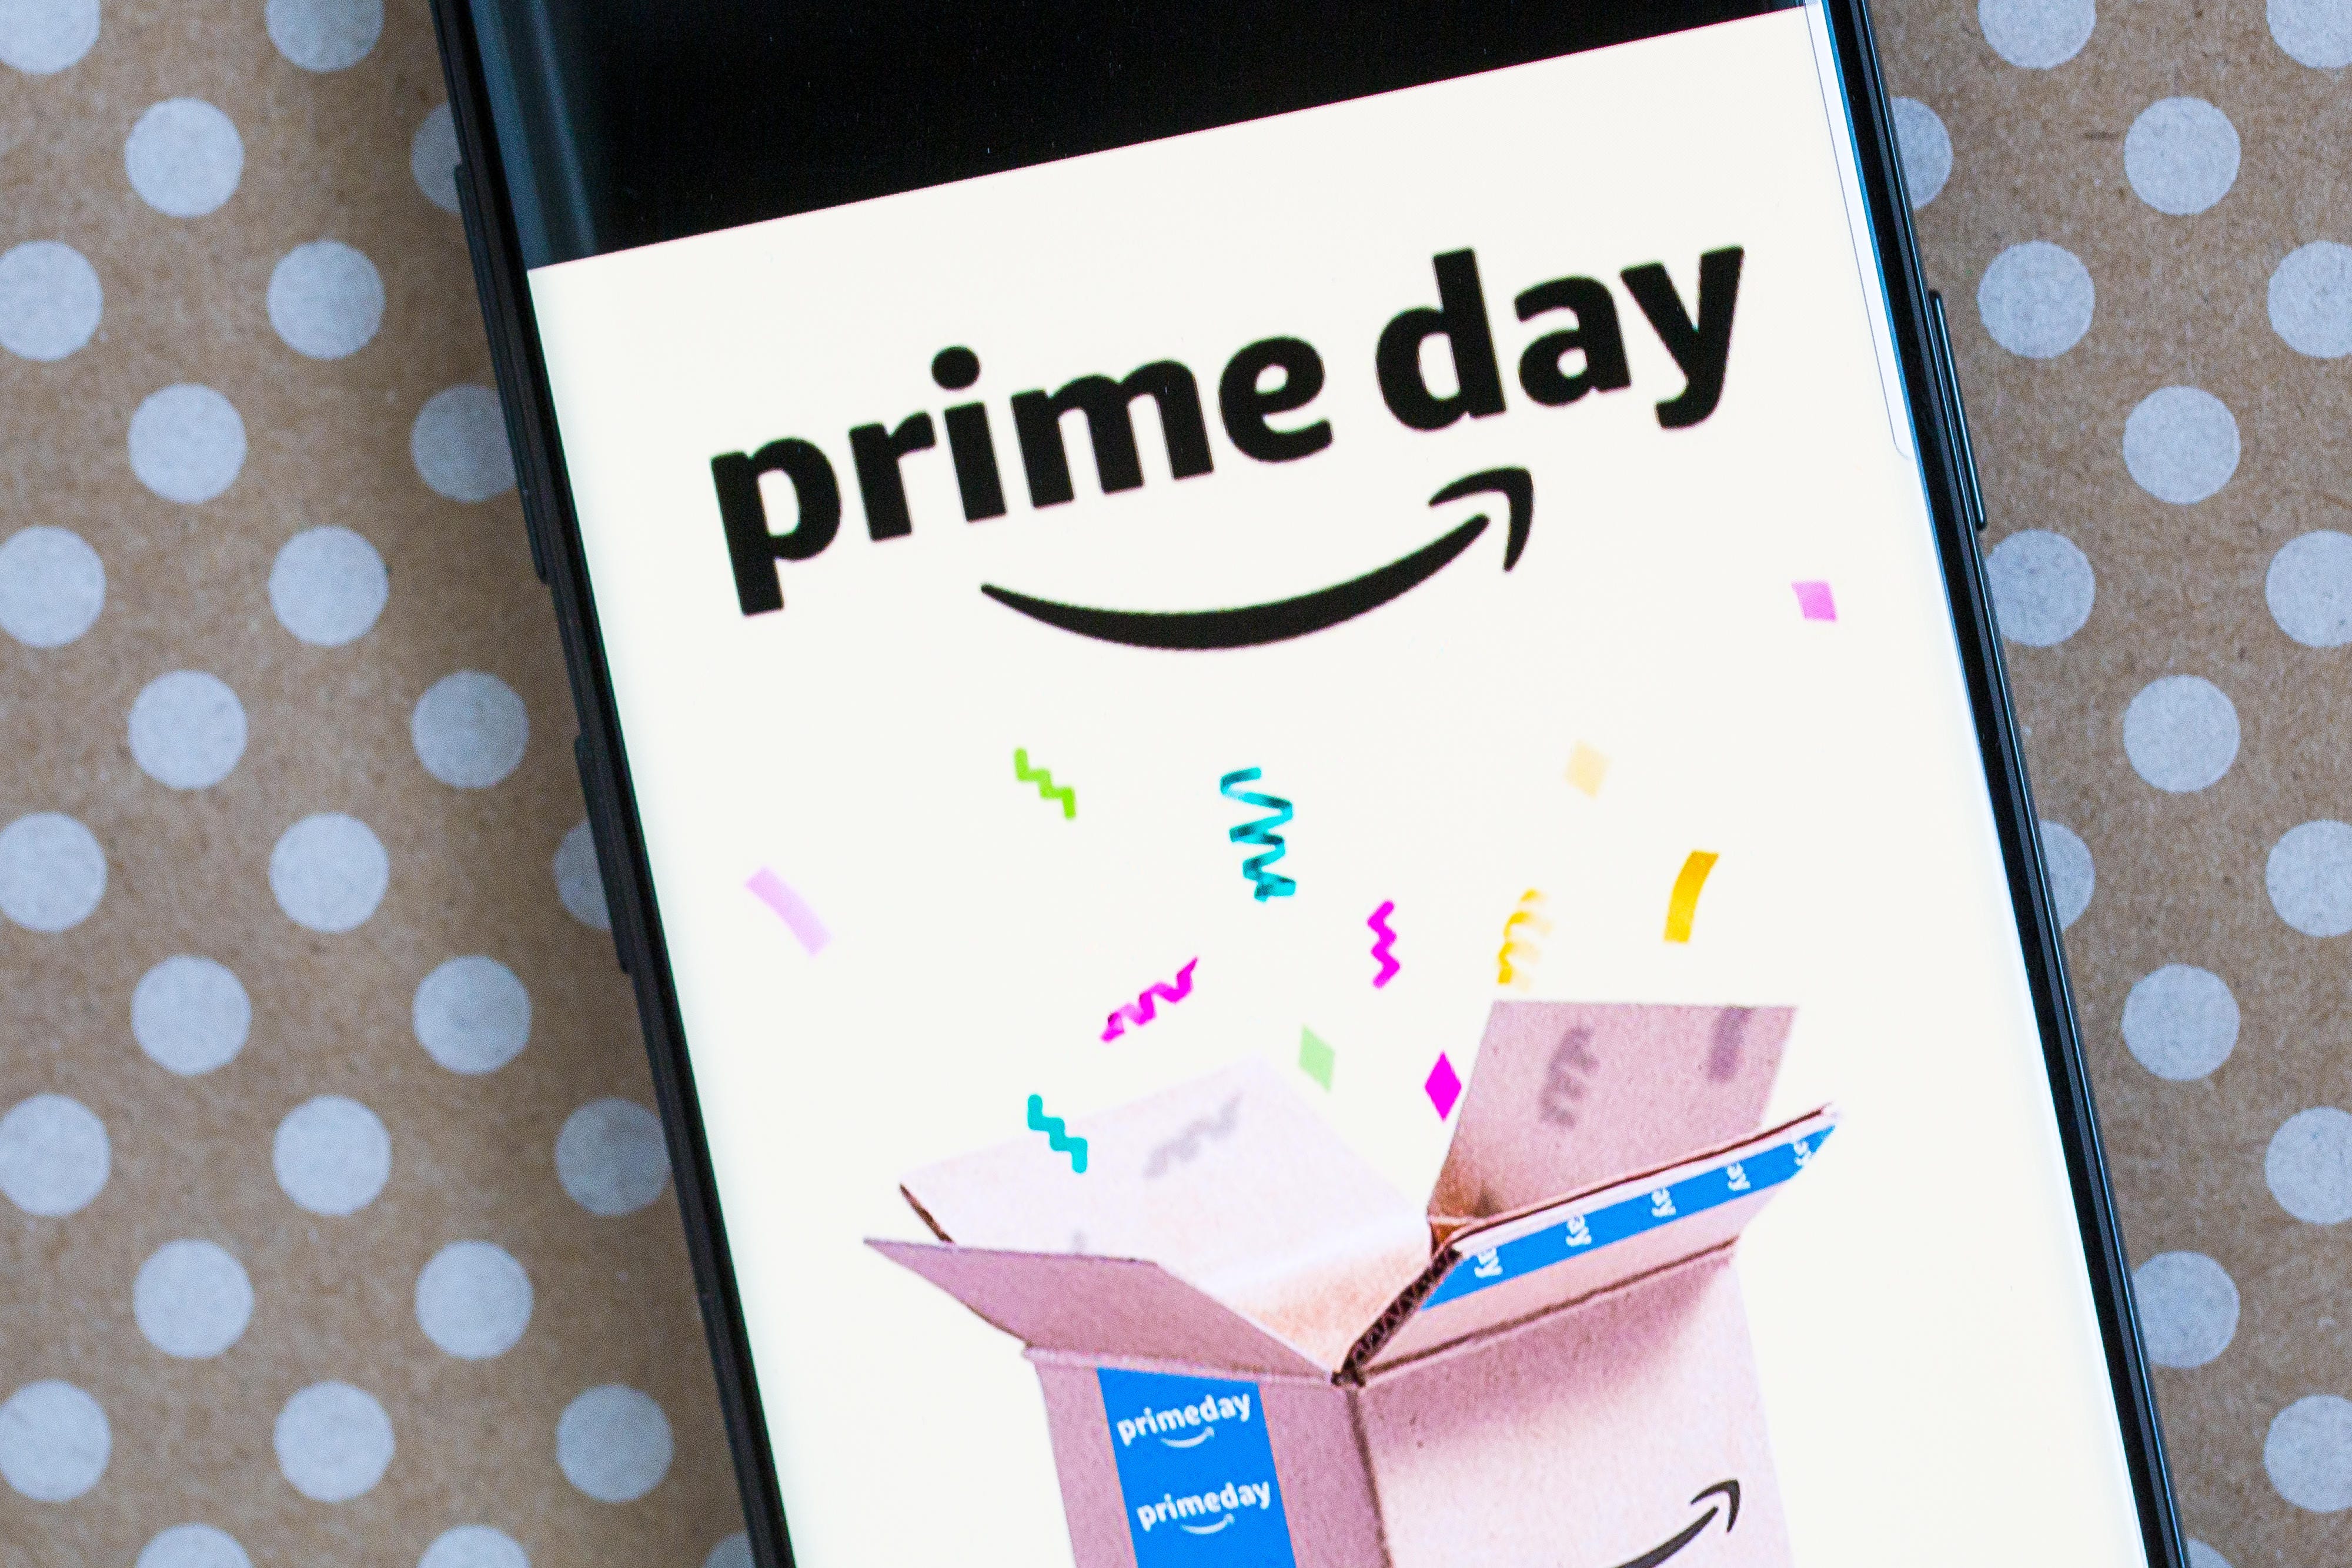 Last chance to get the best Amazon Prime Day deals